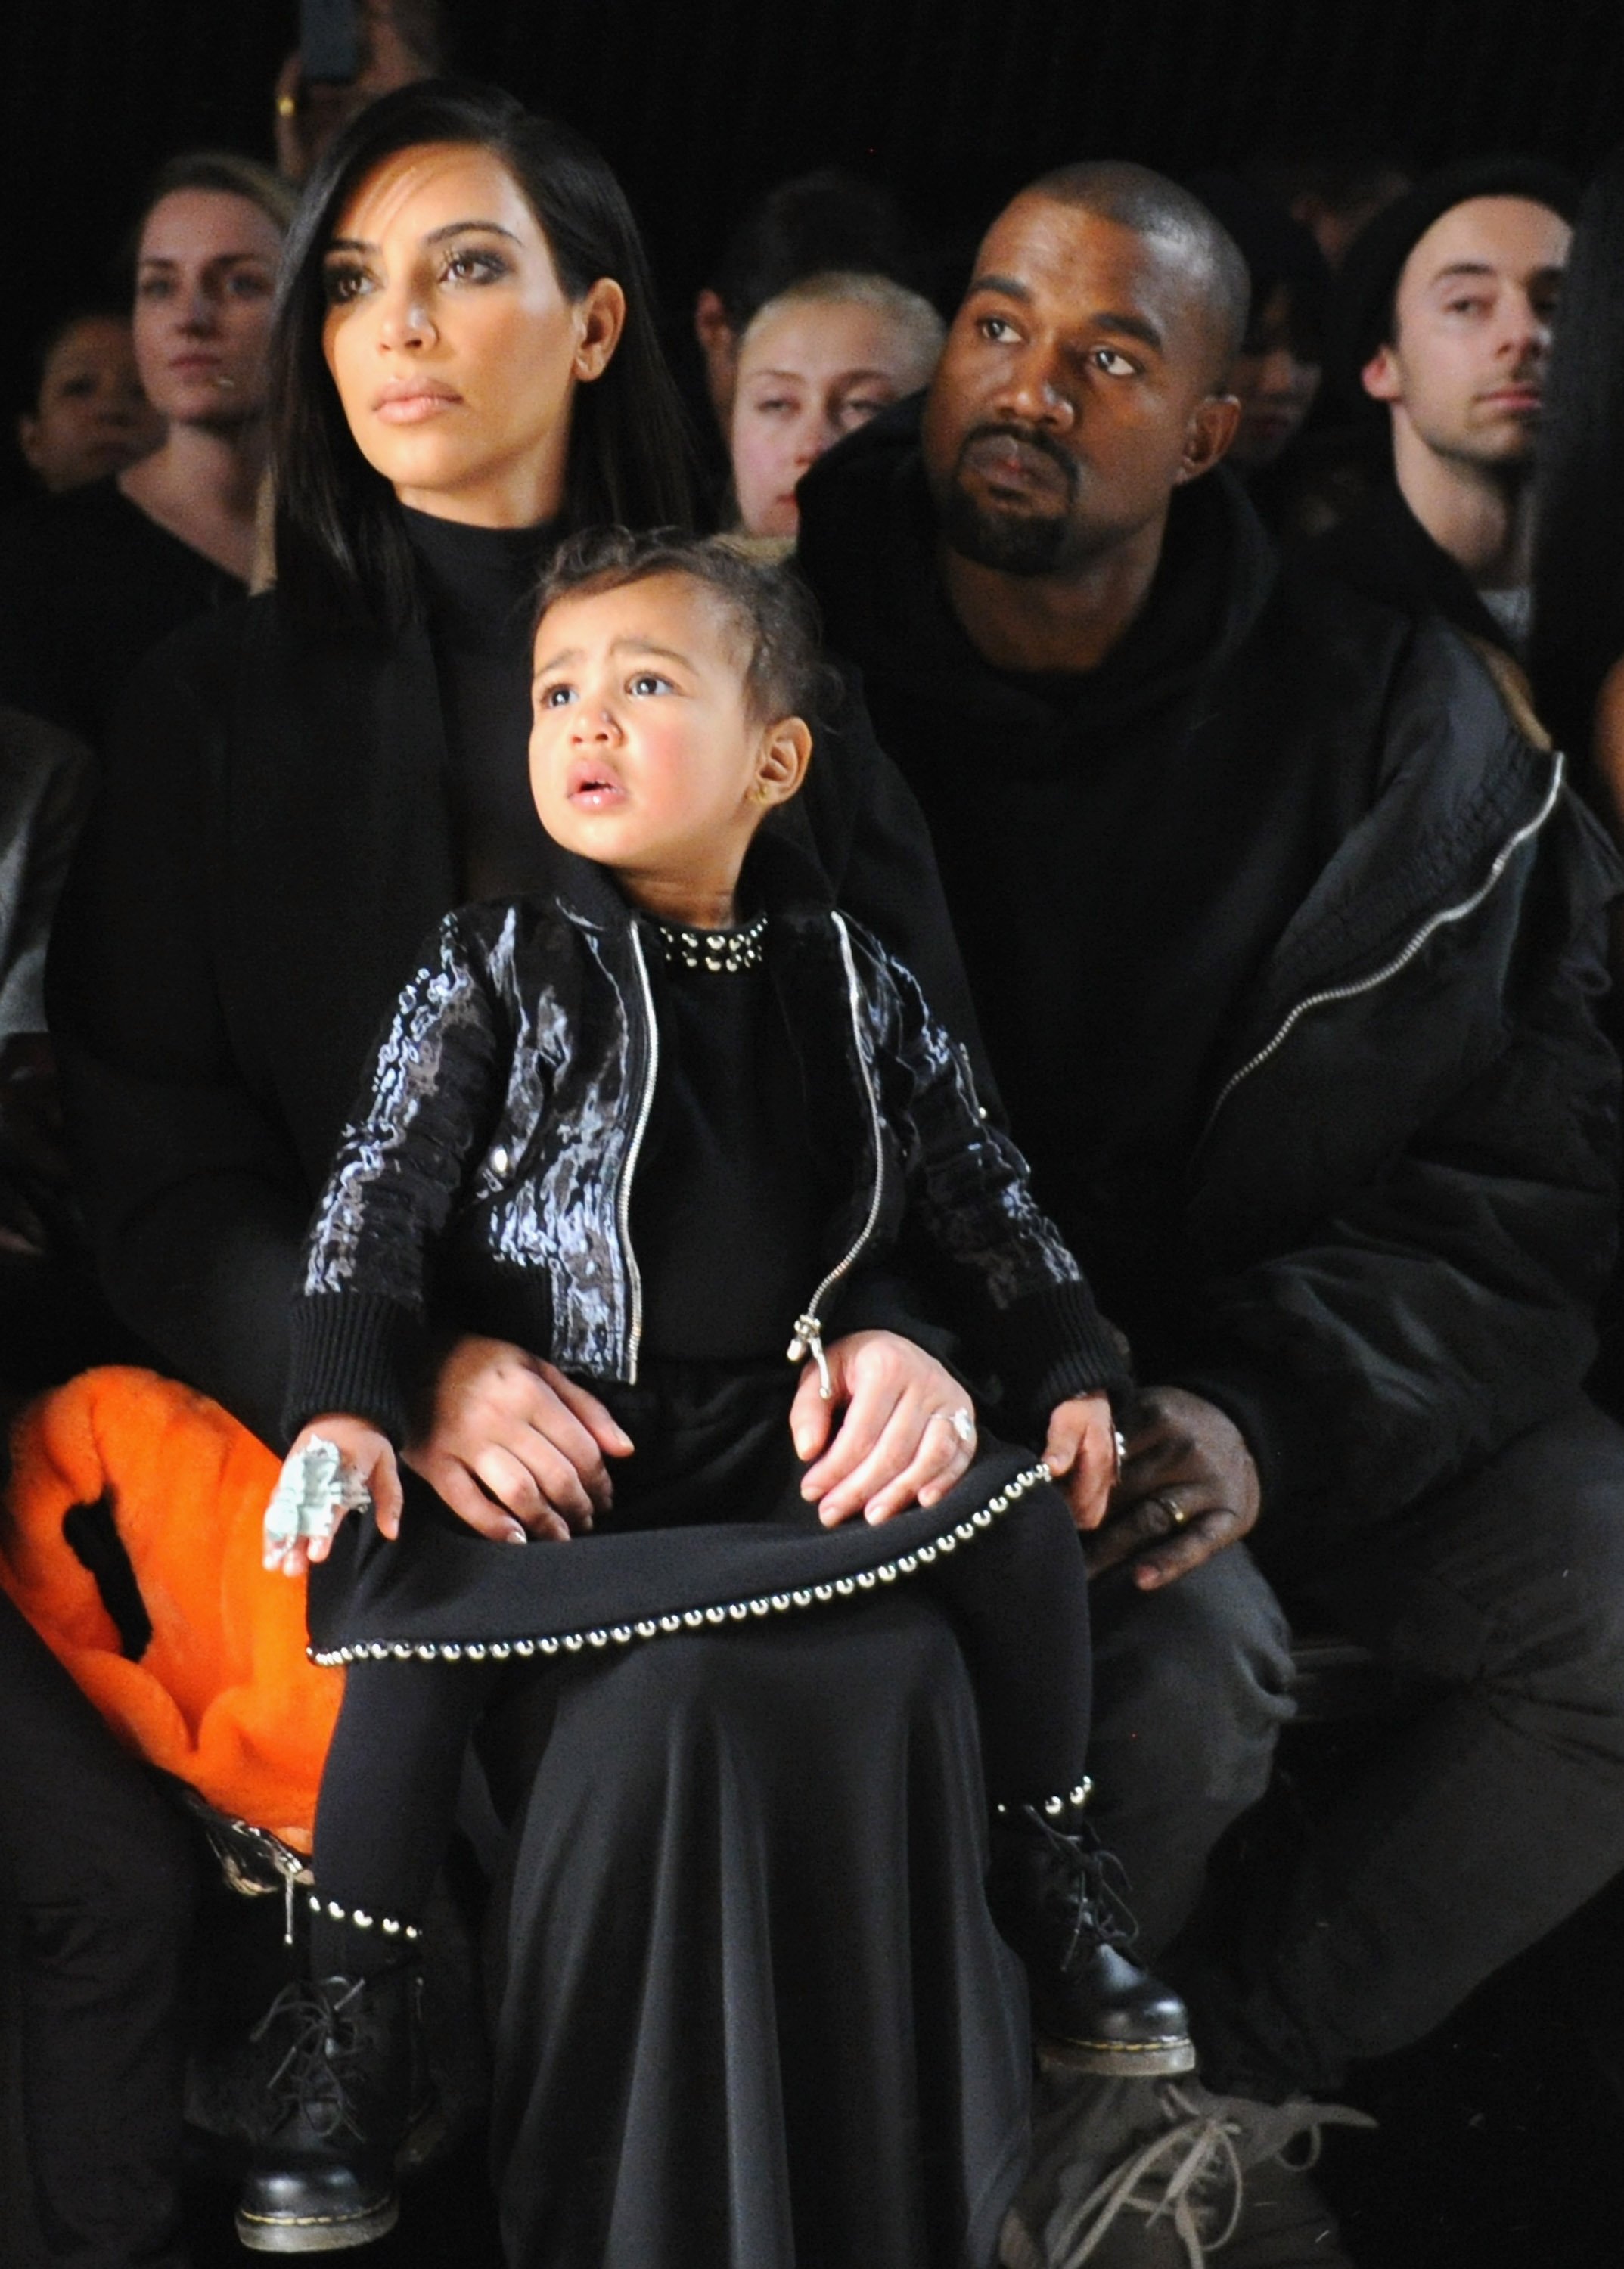 Kim Kardashian, North West and Kanye West attend the Alexander Wang Fashion Show during Mercedes-Benz Fashion Week Fall 2015 at Pier 94 on February 14, 2015 in New York City | Photo: Getty Images